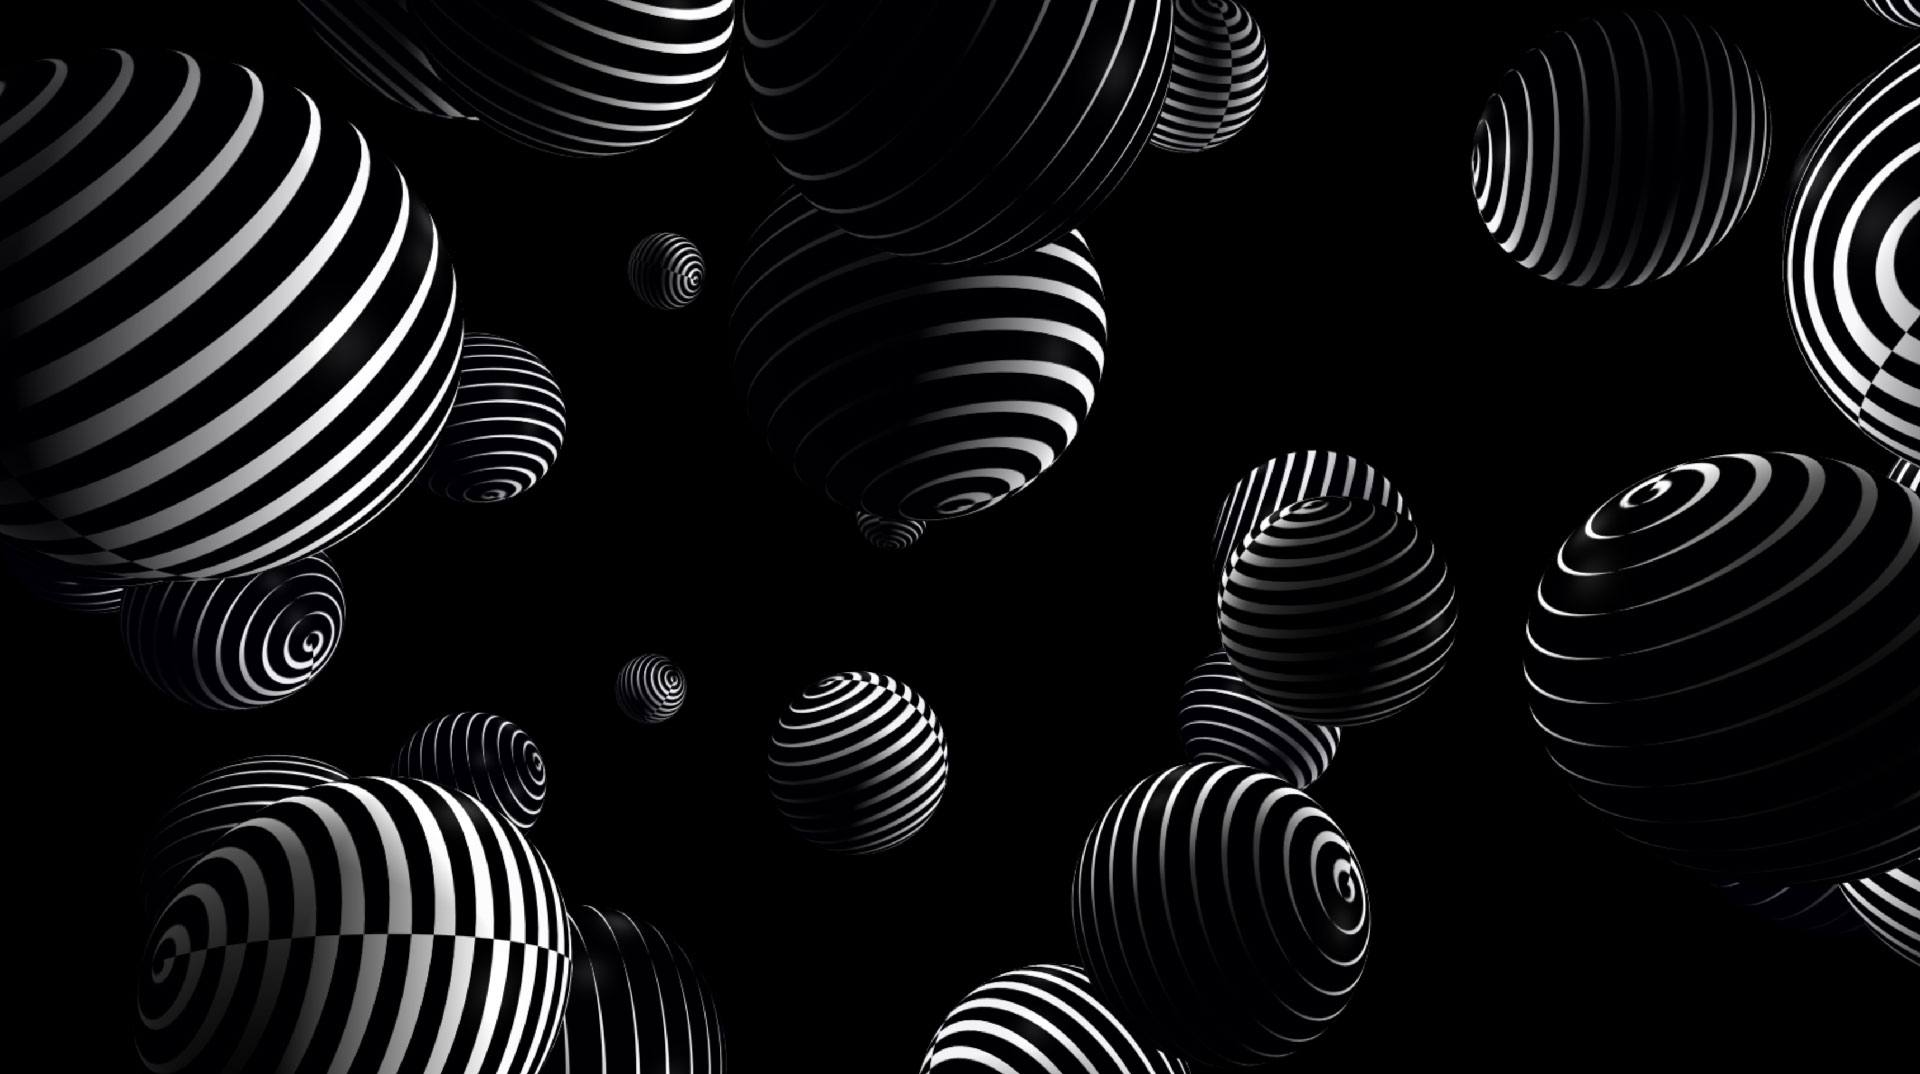 Stills from a WebGL audio visualisation experiments I did back in 2017 with BabylonJS.